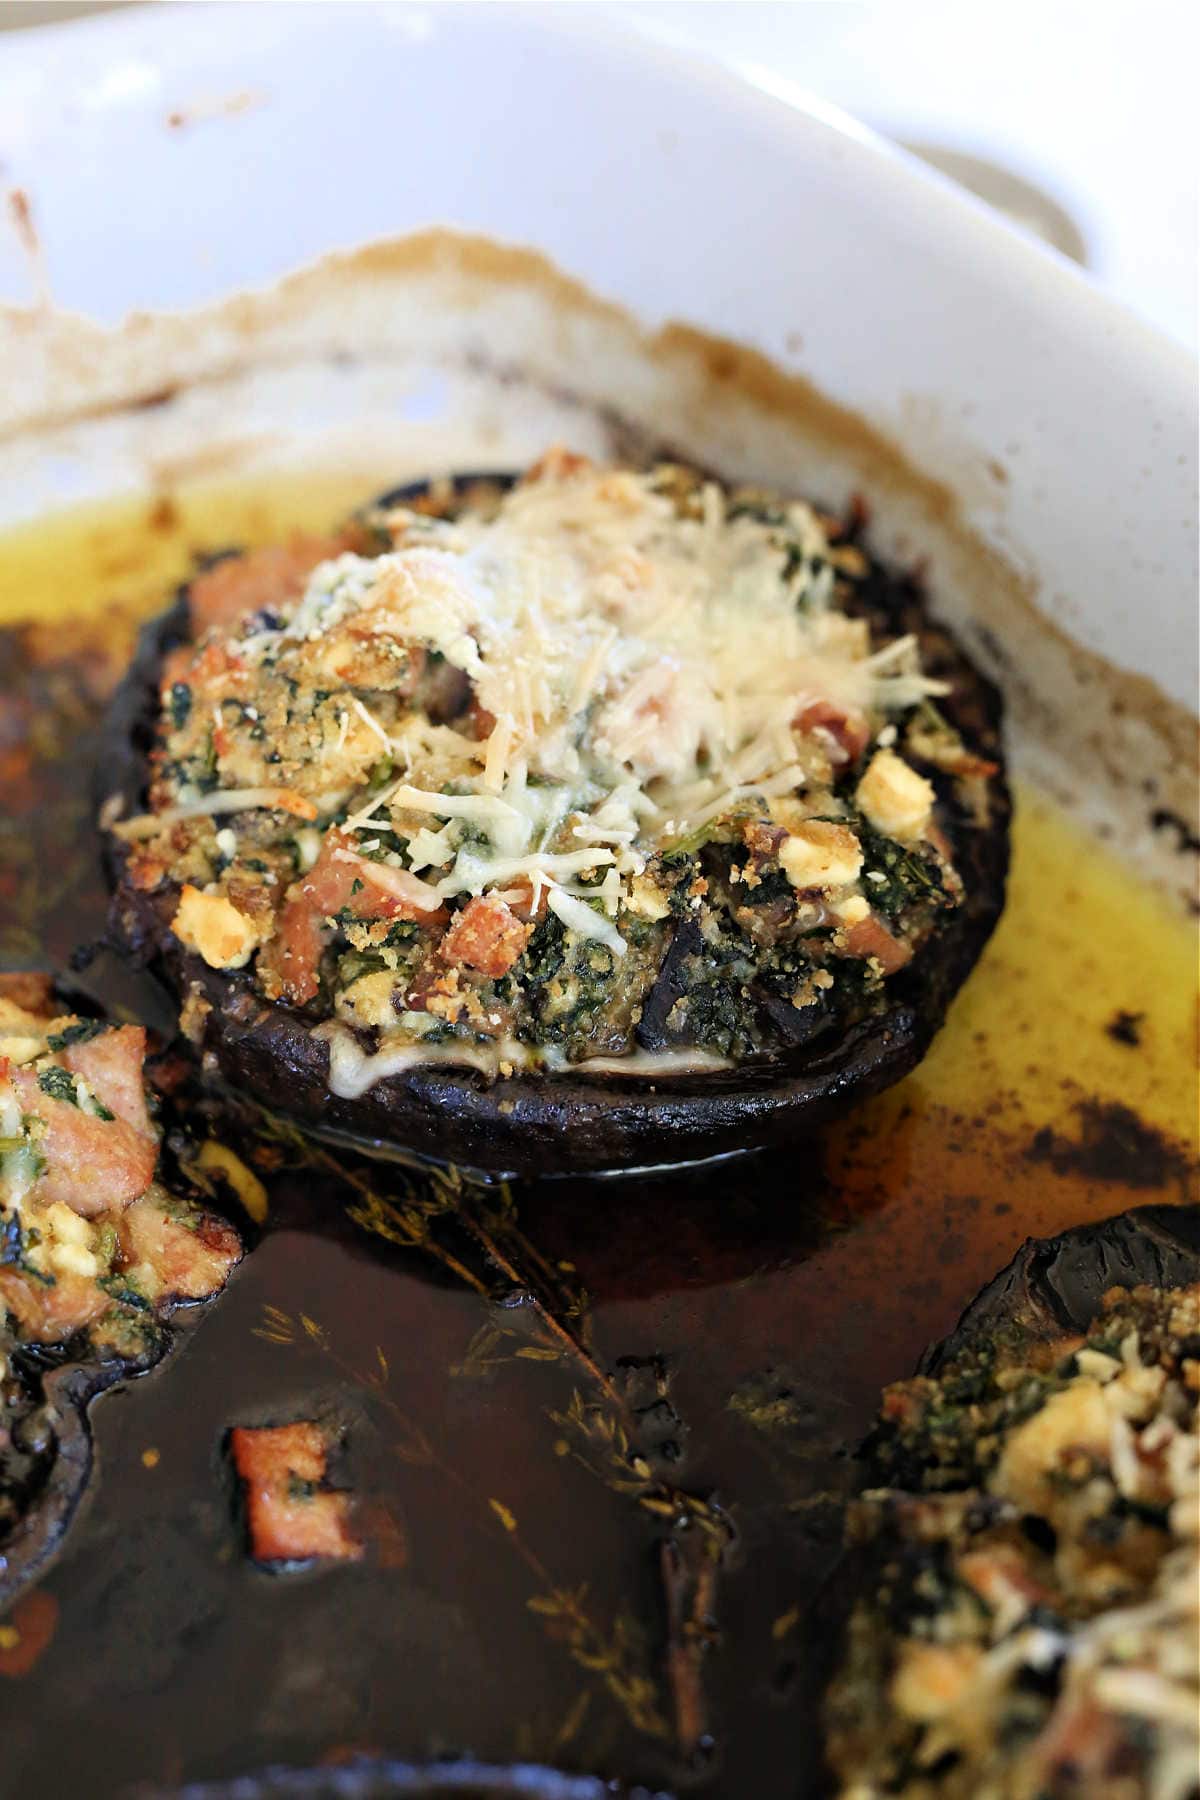 Portobello mushrooms marinated and stuffed with chicken sausage spinach and cheese.